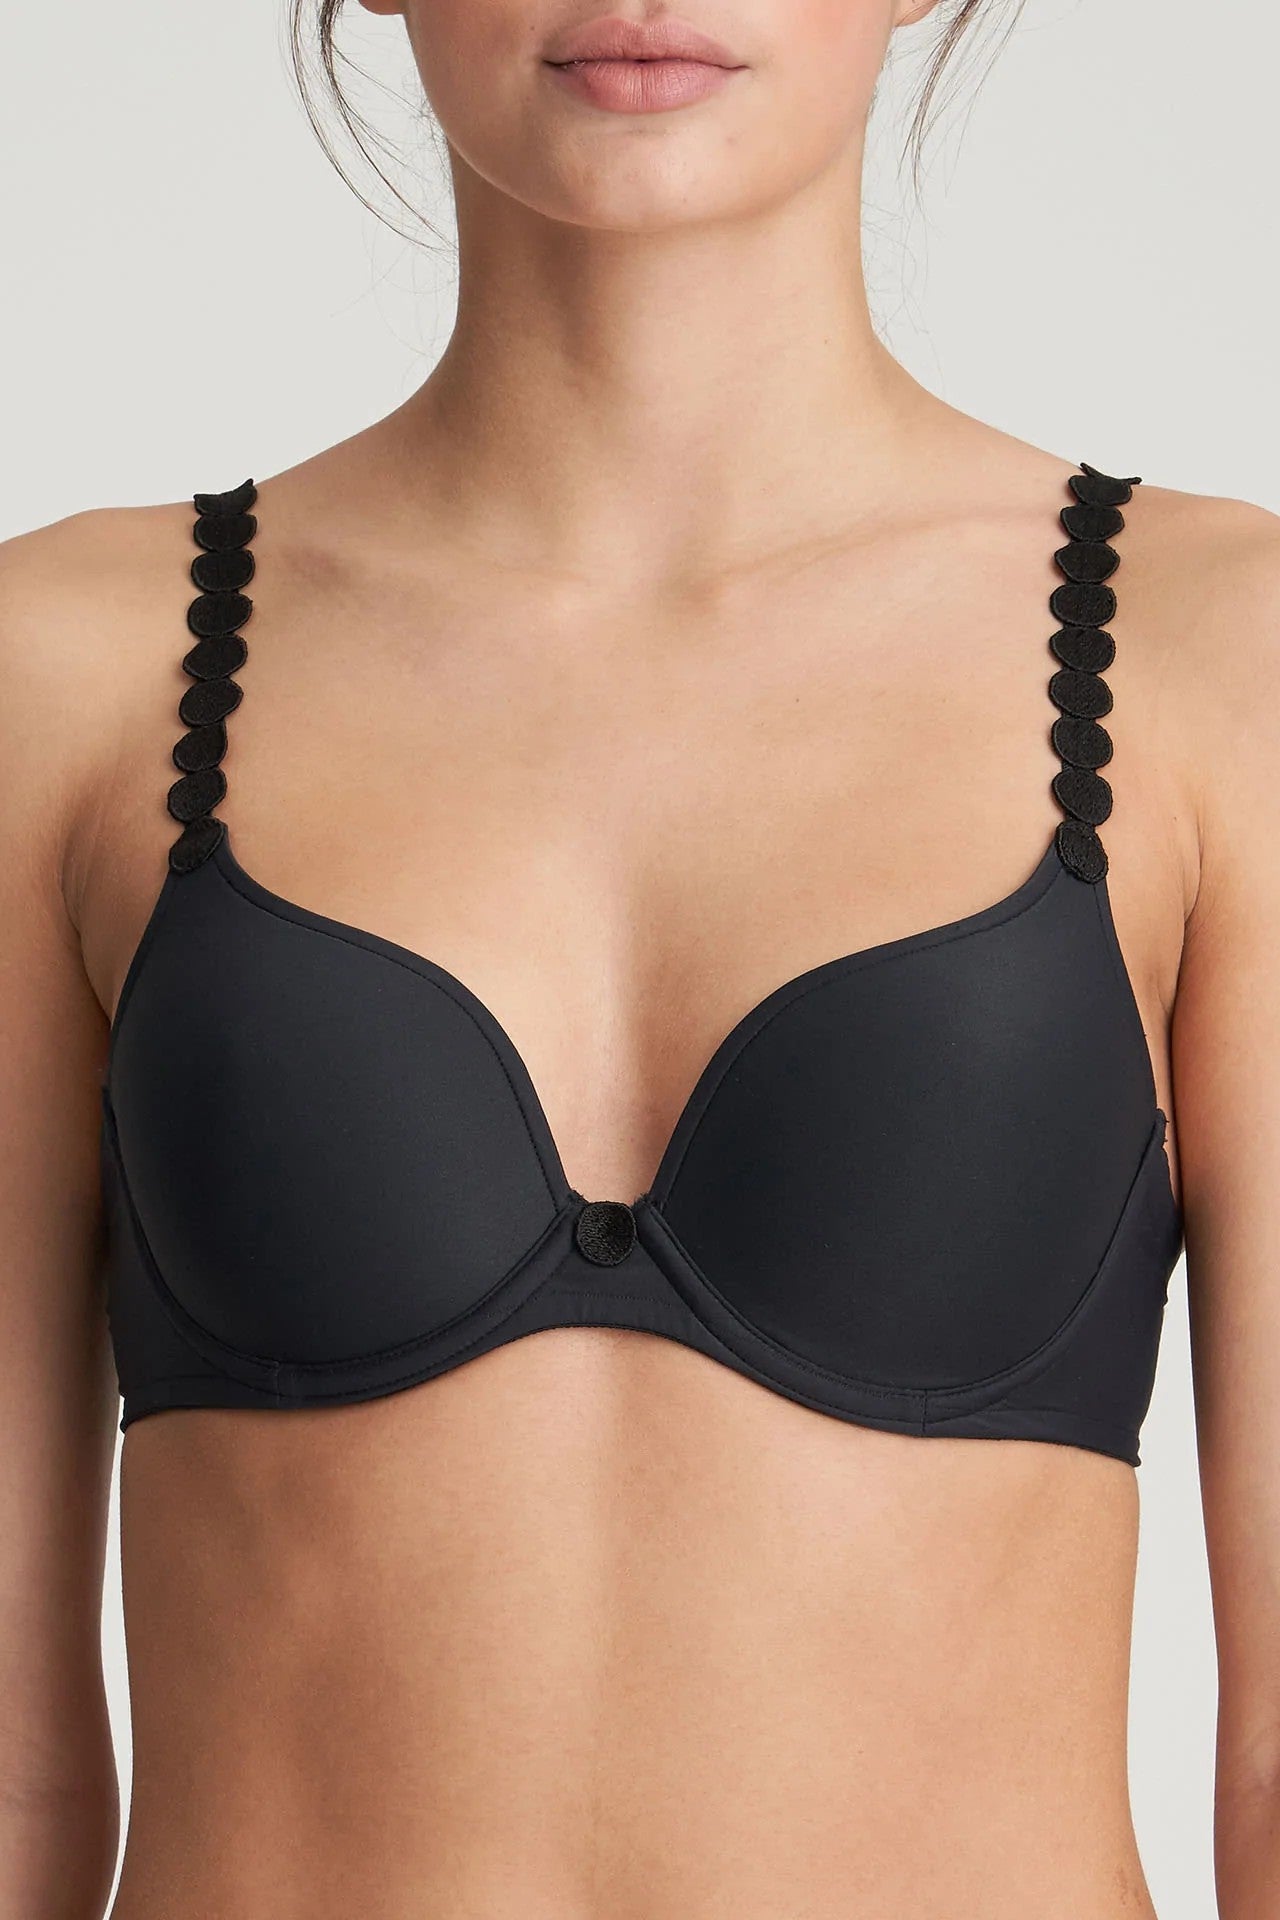 Marie Jo Avero 0100416-APS Women's Apple Sorbet Check Wired Padded Bra 40B  : Marie Jo: : Clothing, Shoes & Accessories